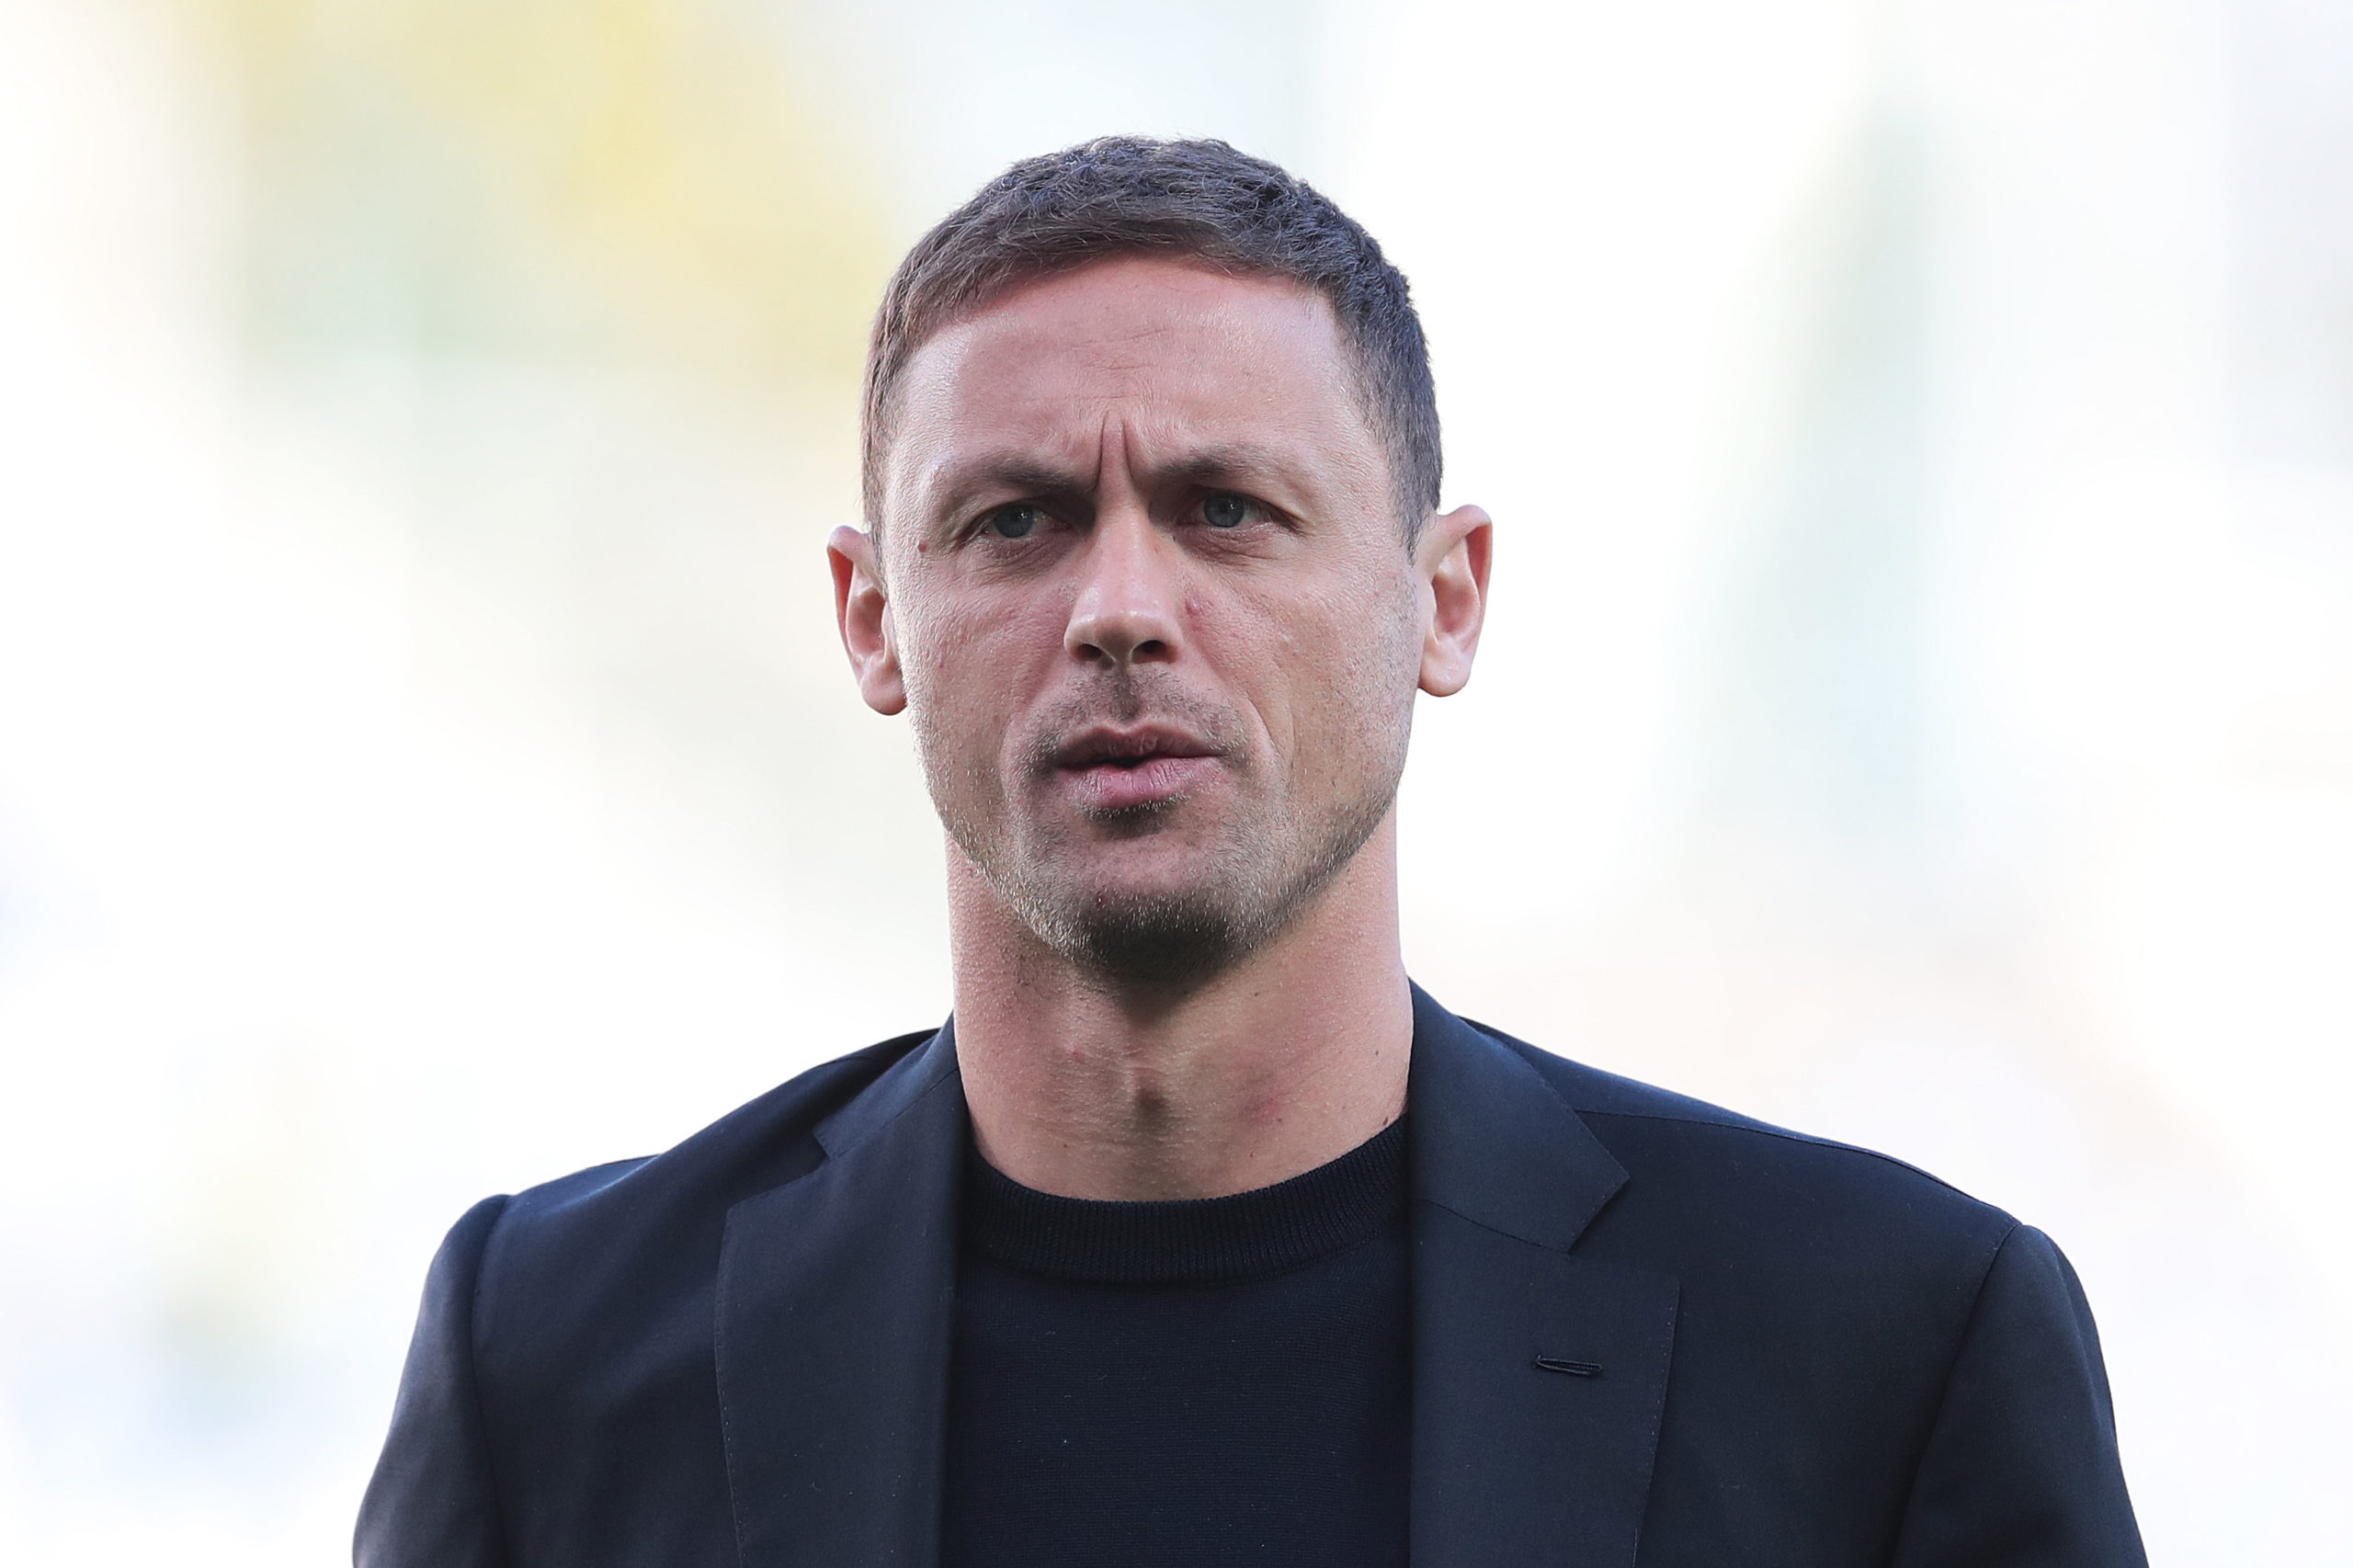 Matic breaks up with Mourinho for the first time in his career, as it was evident after their relationship went south after tensions arose during preseason.